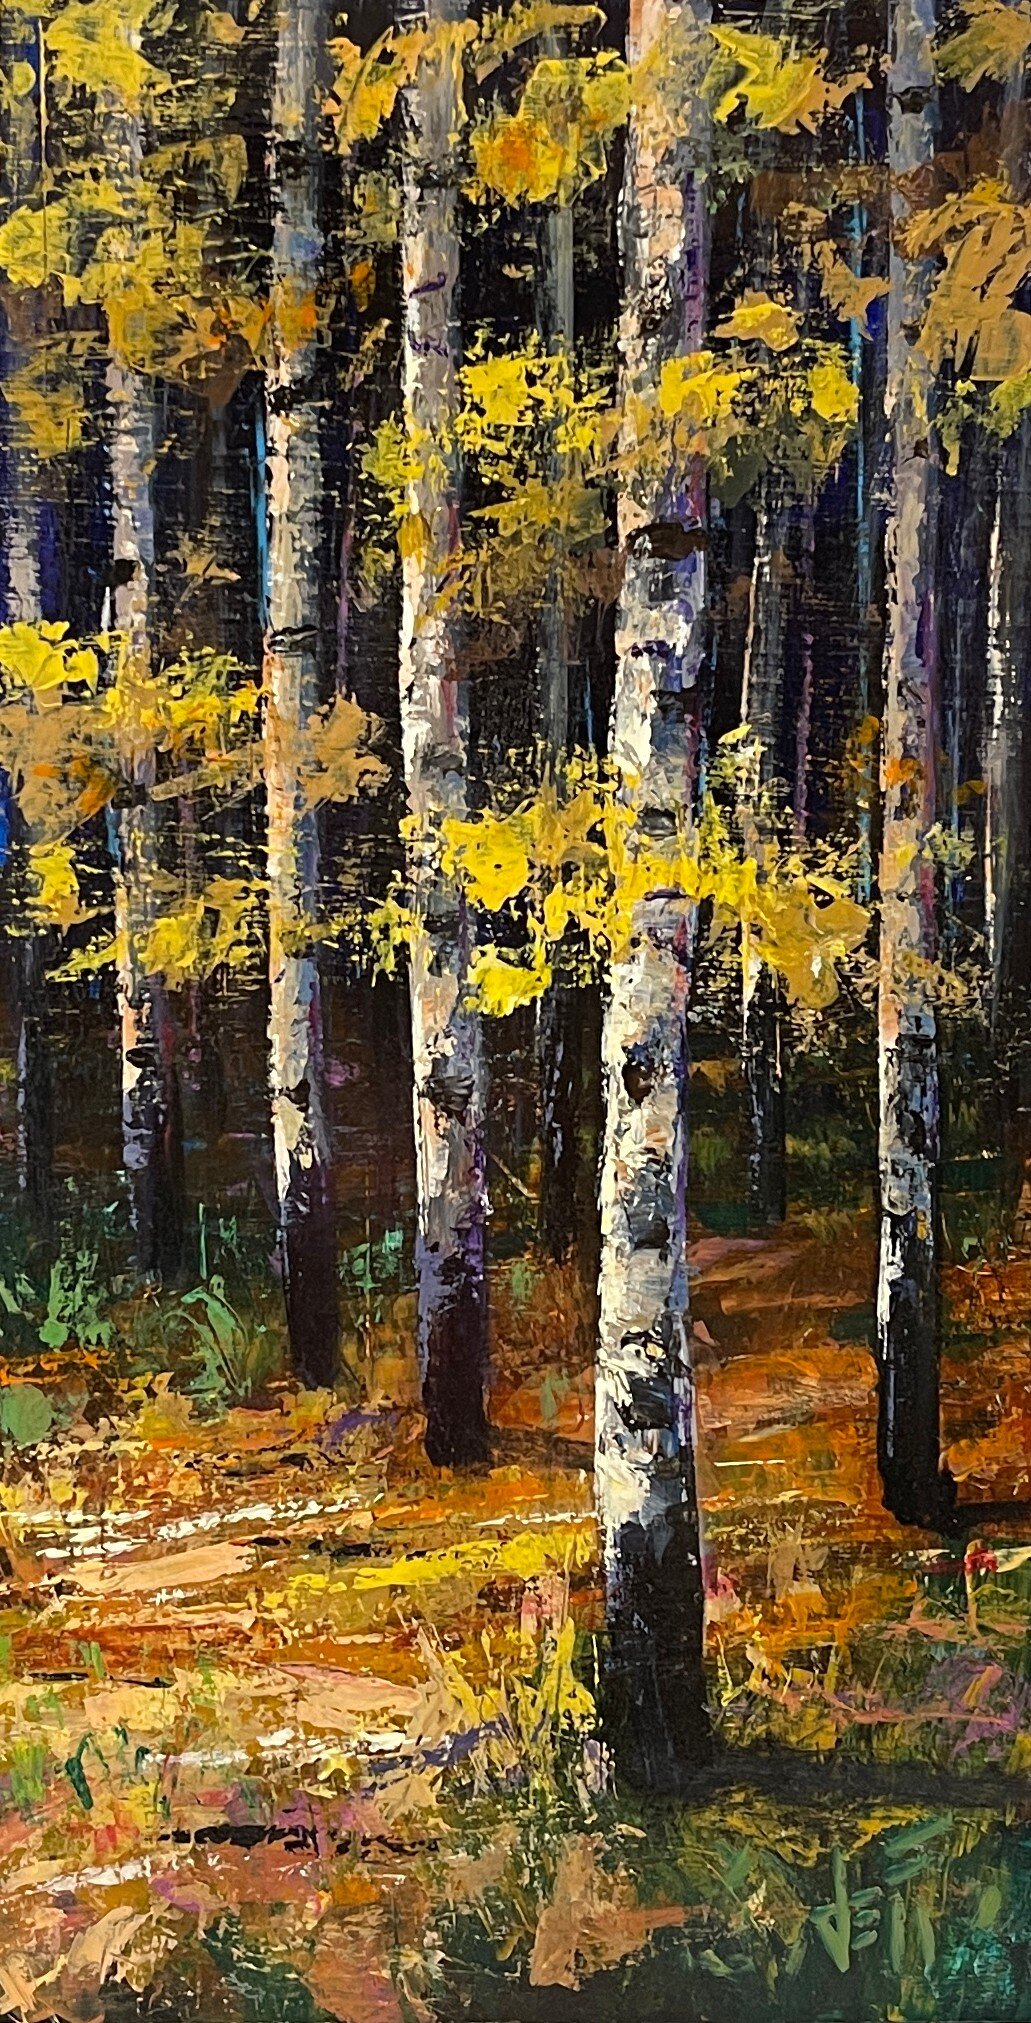  Neck Of The Woods-acrylic on board 37” x 19”   Boutin Gallery 